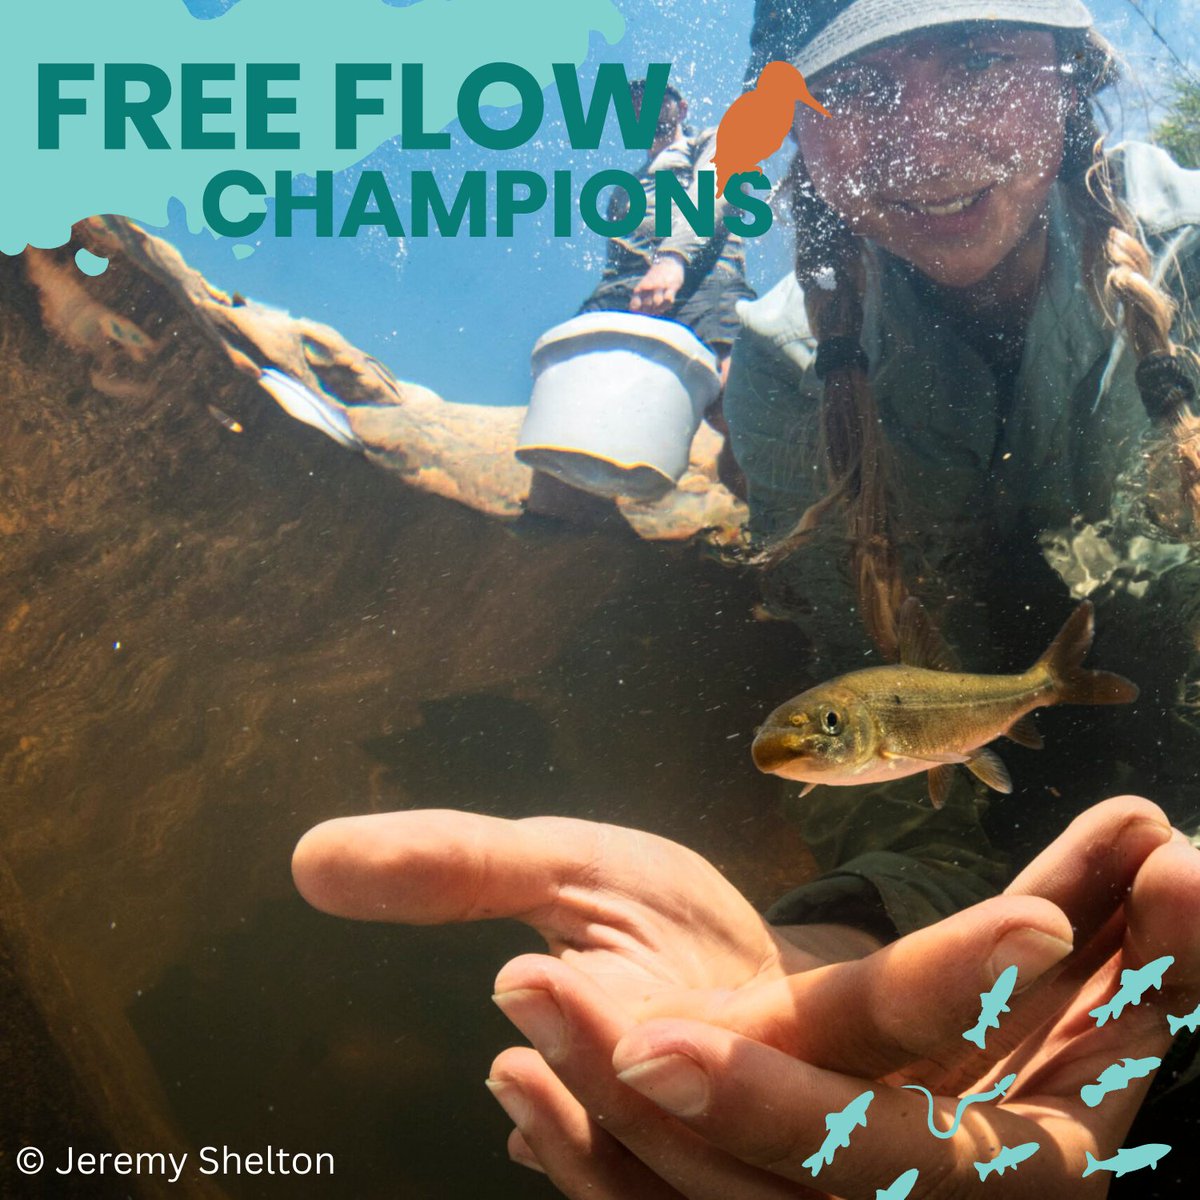 🏆Meet the Free Flow Champion: Jeremy Shelton from Freshwater Research Center!

Based in South Africa, @freshwatersa initiated Africa’s largest freshwater fish rescue effort aimed at saving the Clanwilliam sandfish.

➡️Read the full interview at worldfishmigrationfoundation.com/meet-the-free-…